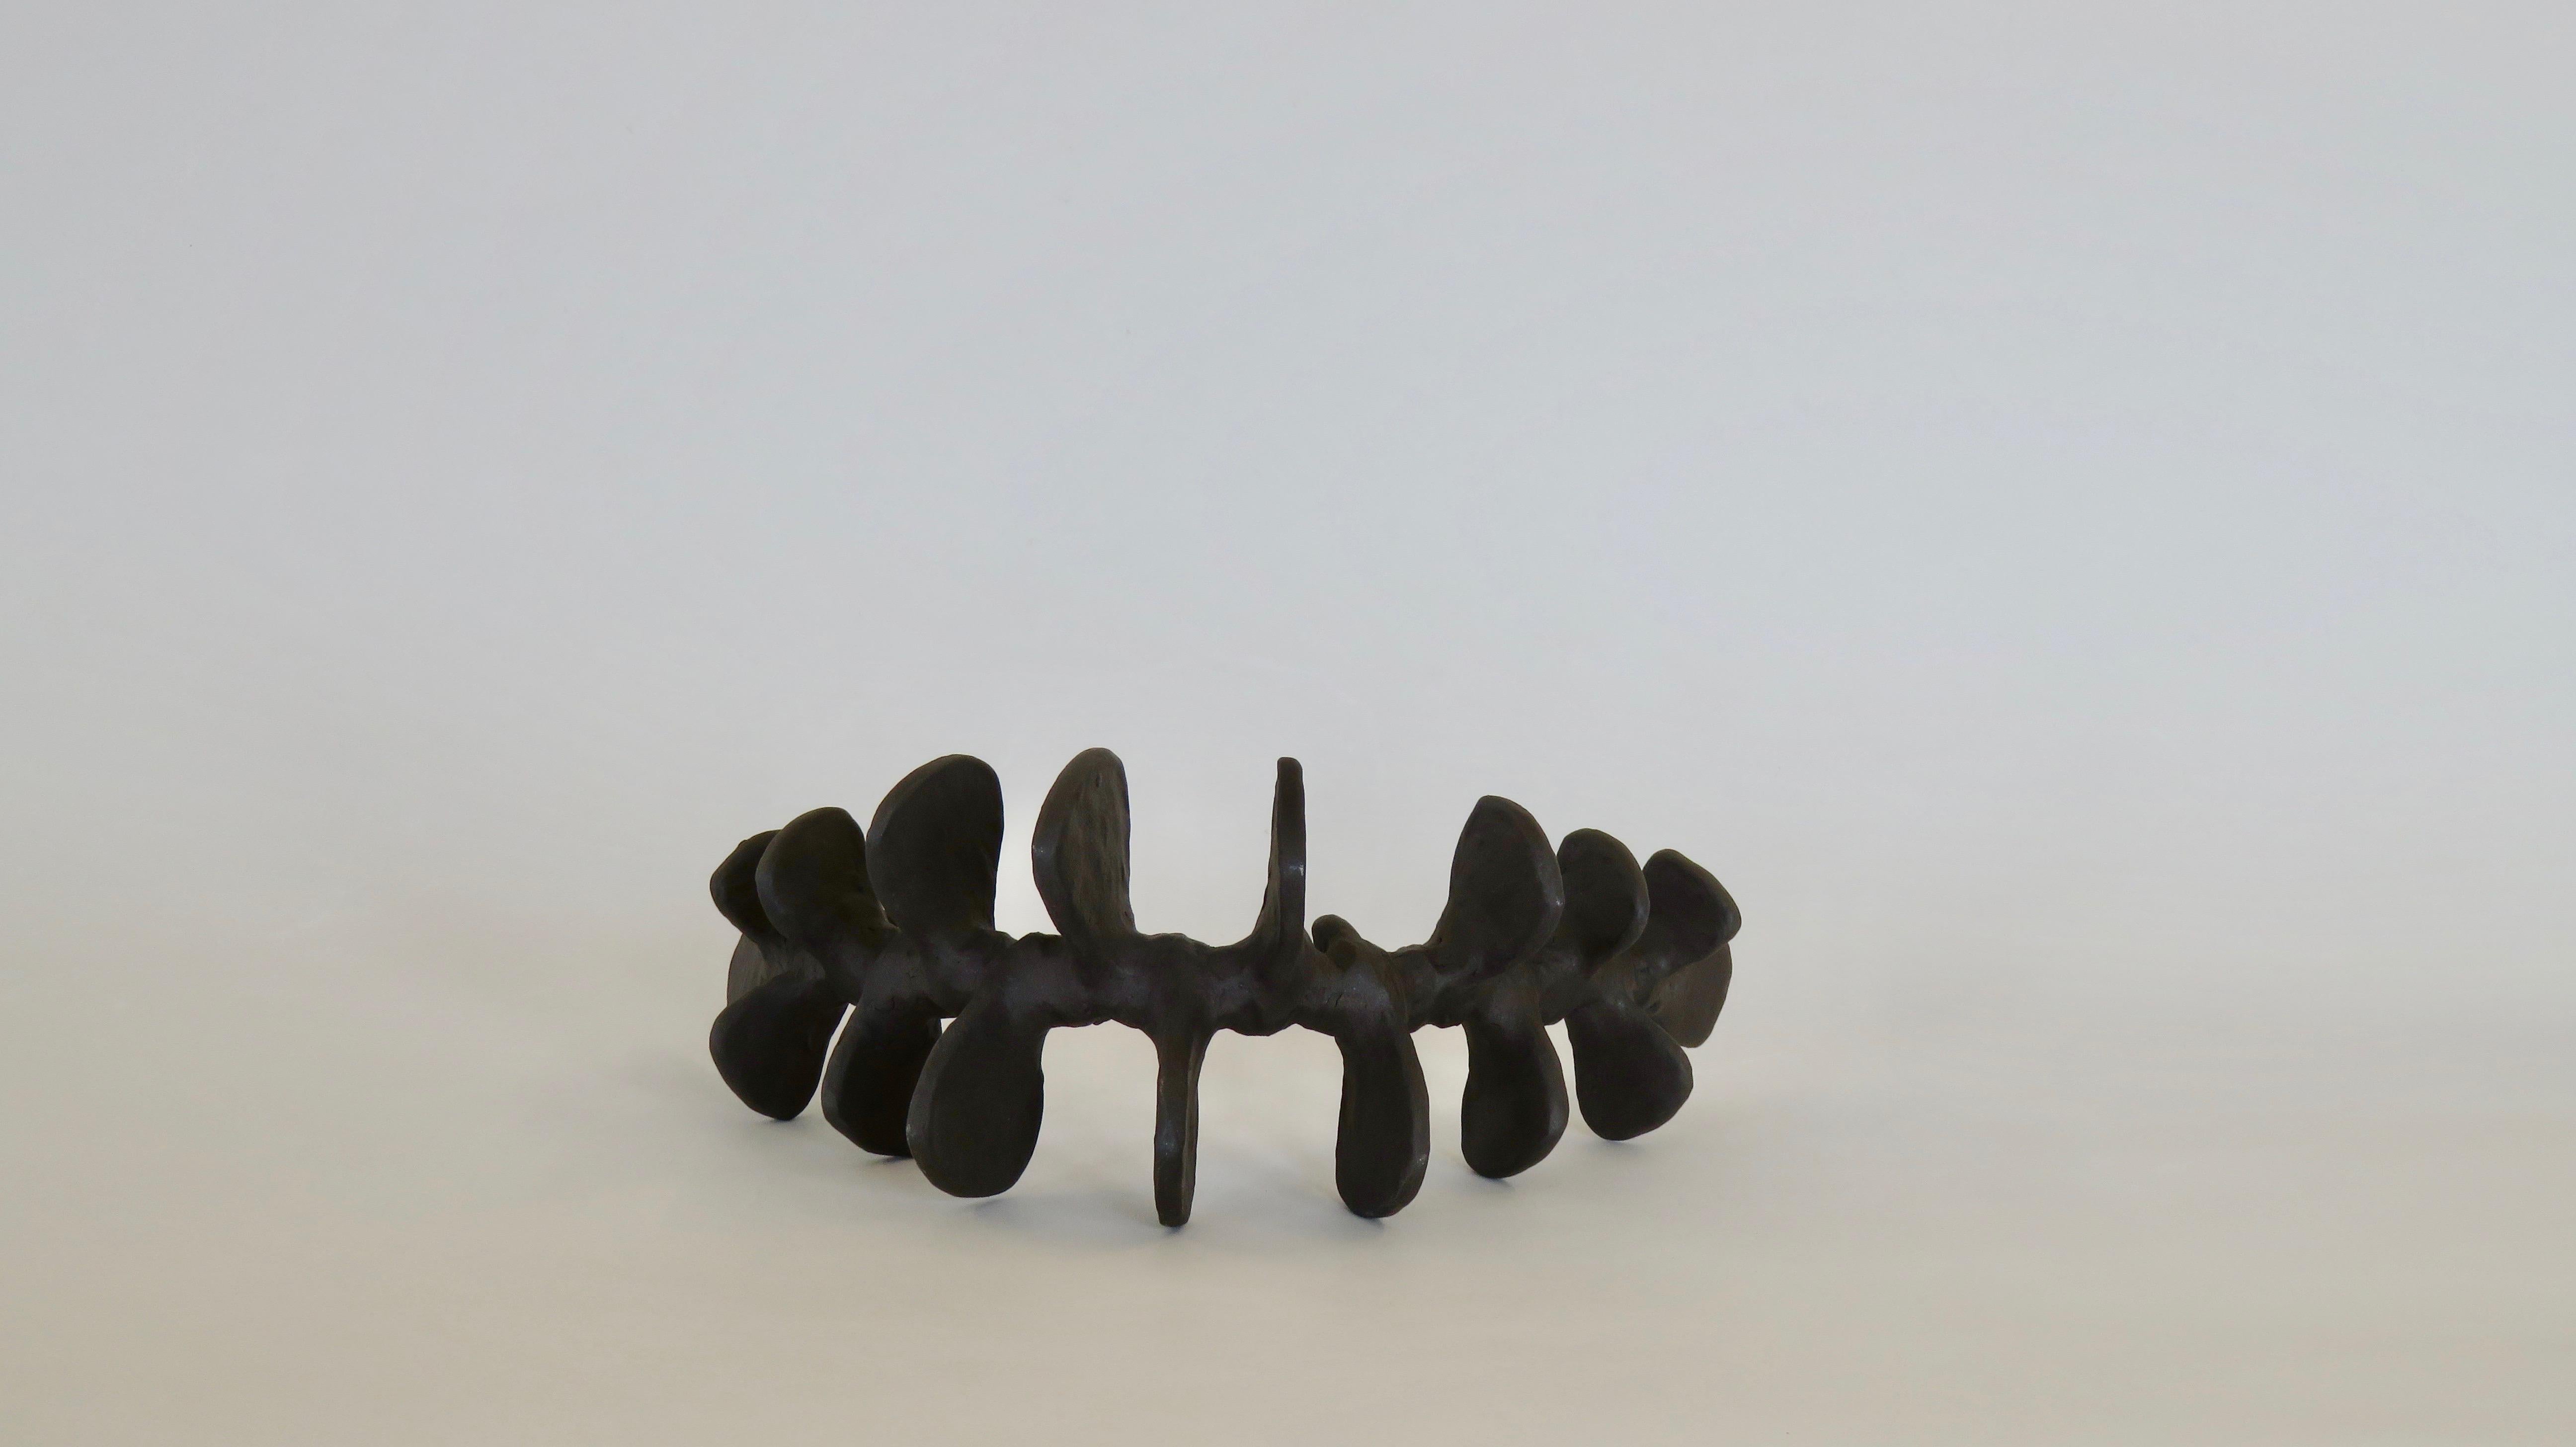 Hand-Crafted Deep Brown Spine-Like Ceramic Sculpture in Brown Stoneware, Hand Built